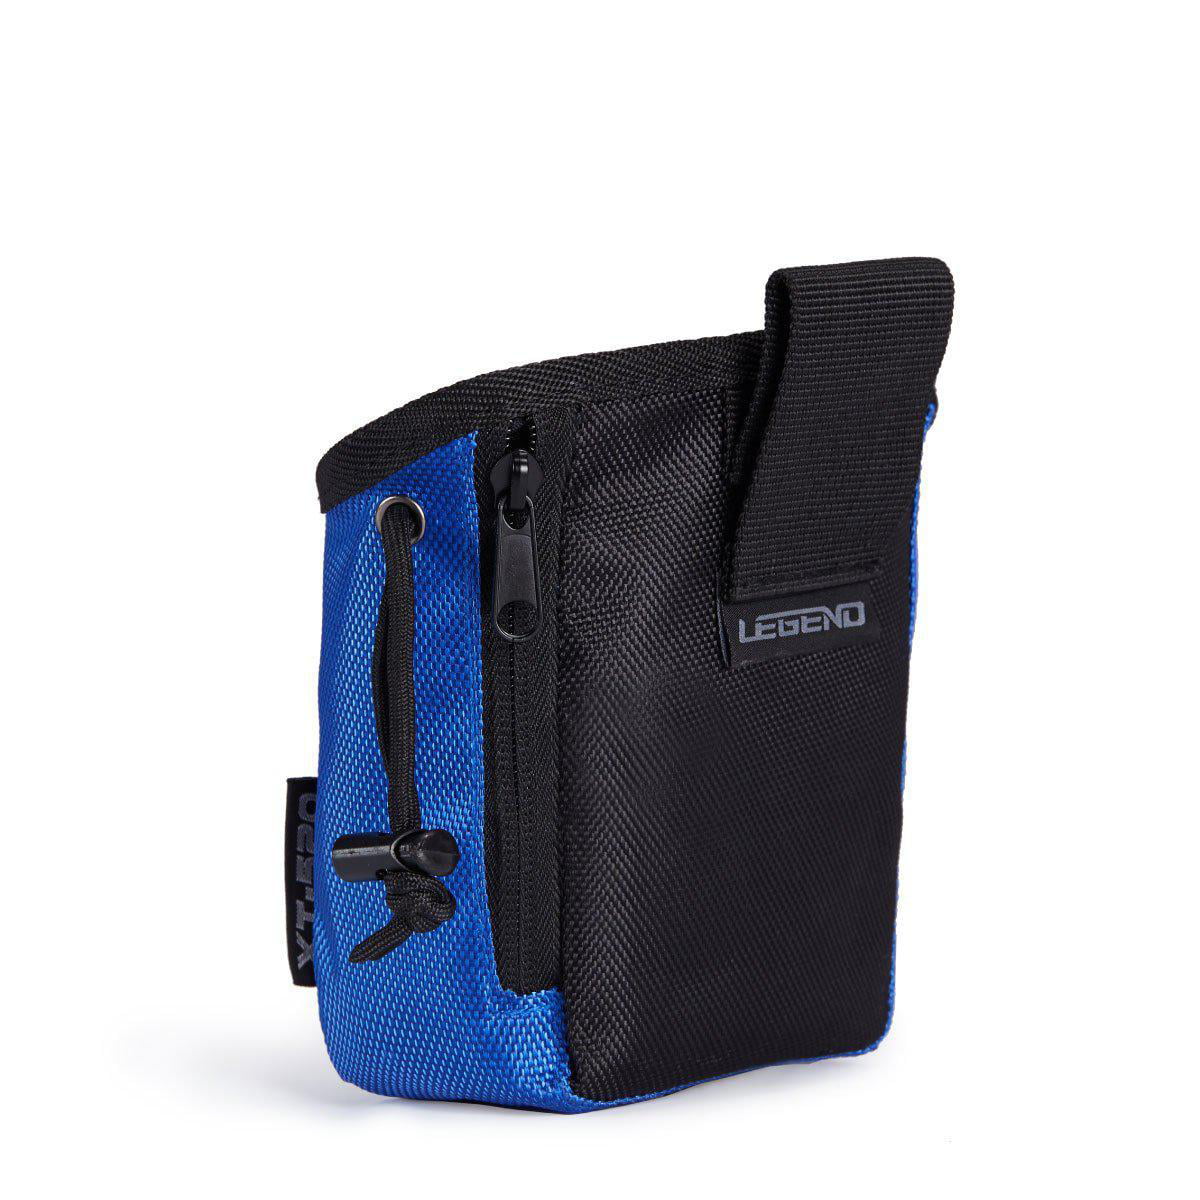 Attaches to Standard 2 Belt Legend XT520 Quick Release Pouch & Finger Tab Bag Interior Divider for Better Organization & Storage of Release Aids Quick Drawstring Closure 